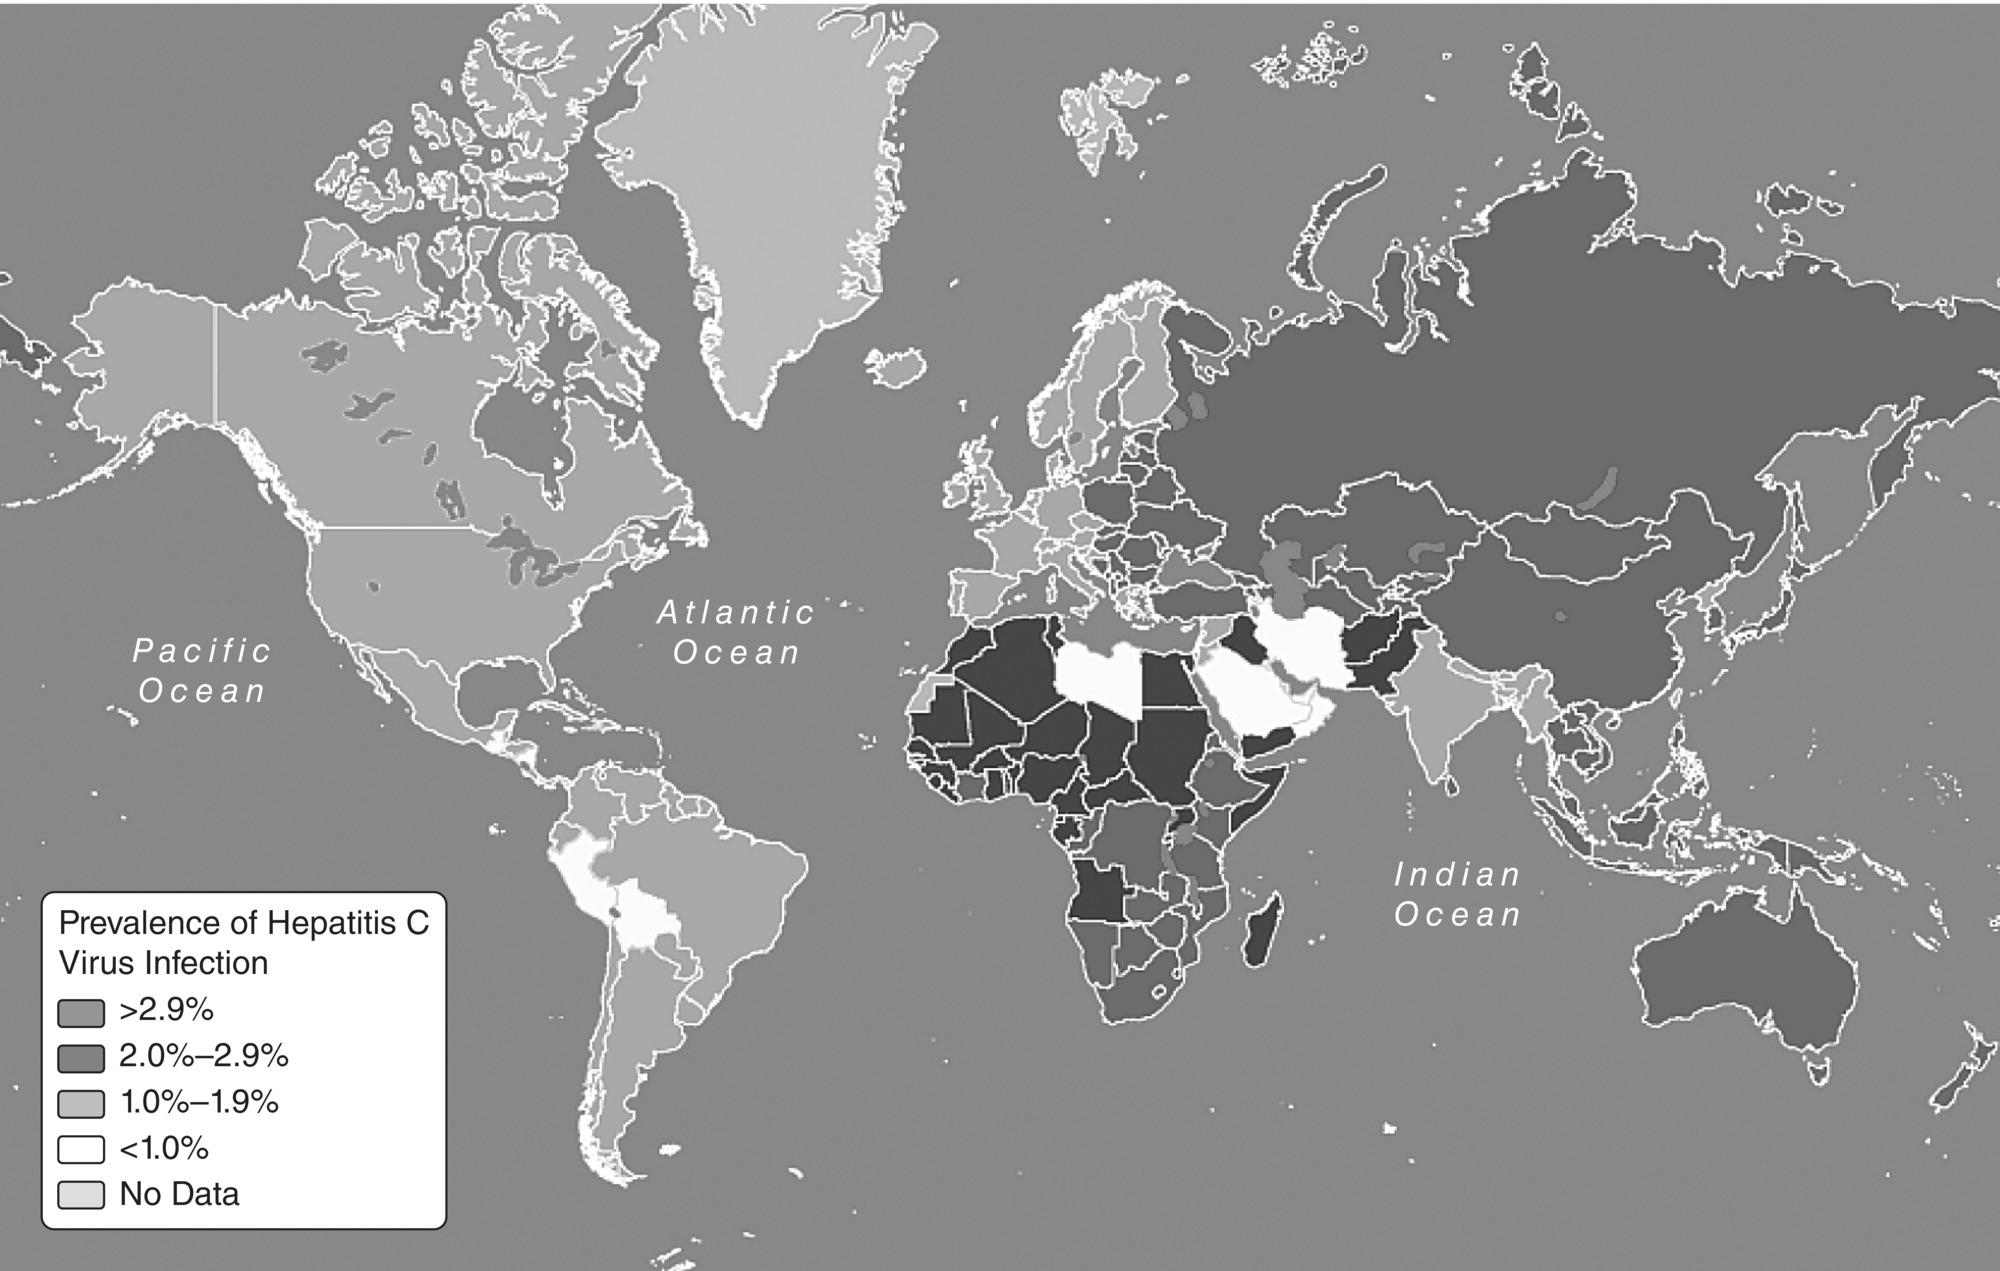 World map with markings—five differently shaded parts for >2.9%, 2.0%–2.9%, 1.0%–1.9%, <1.0% and no data—for prevalence of hepatitis C virus infection.